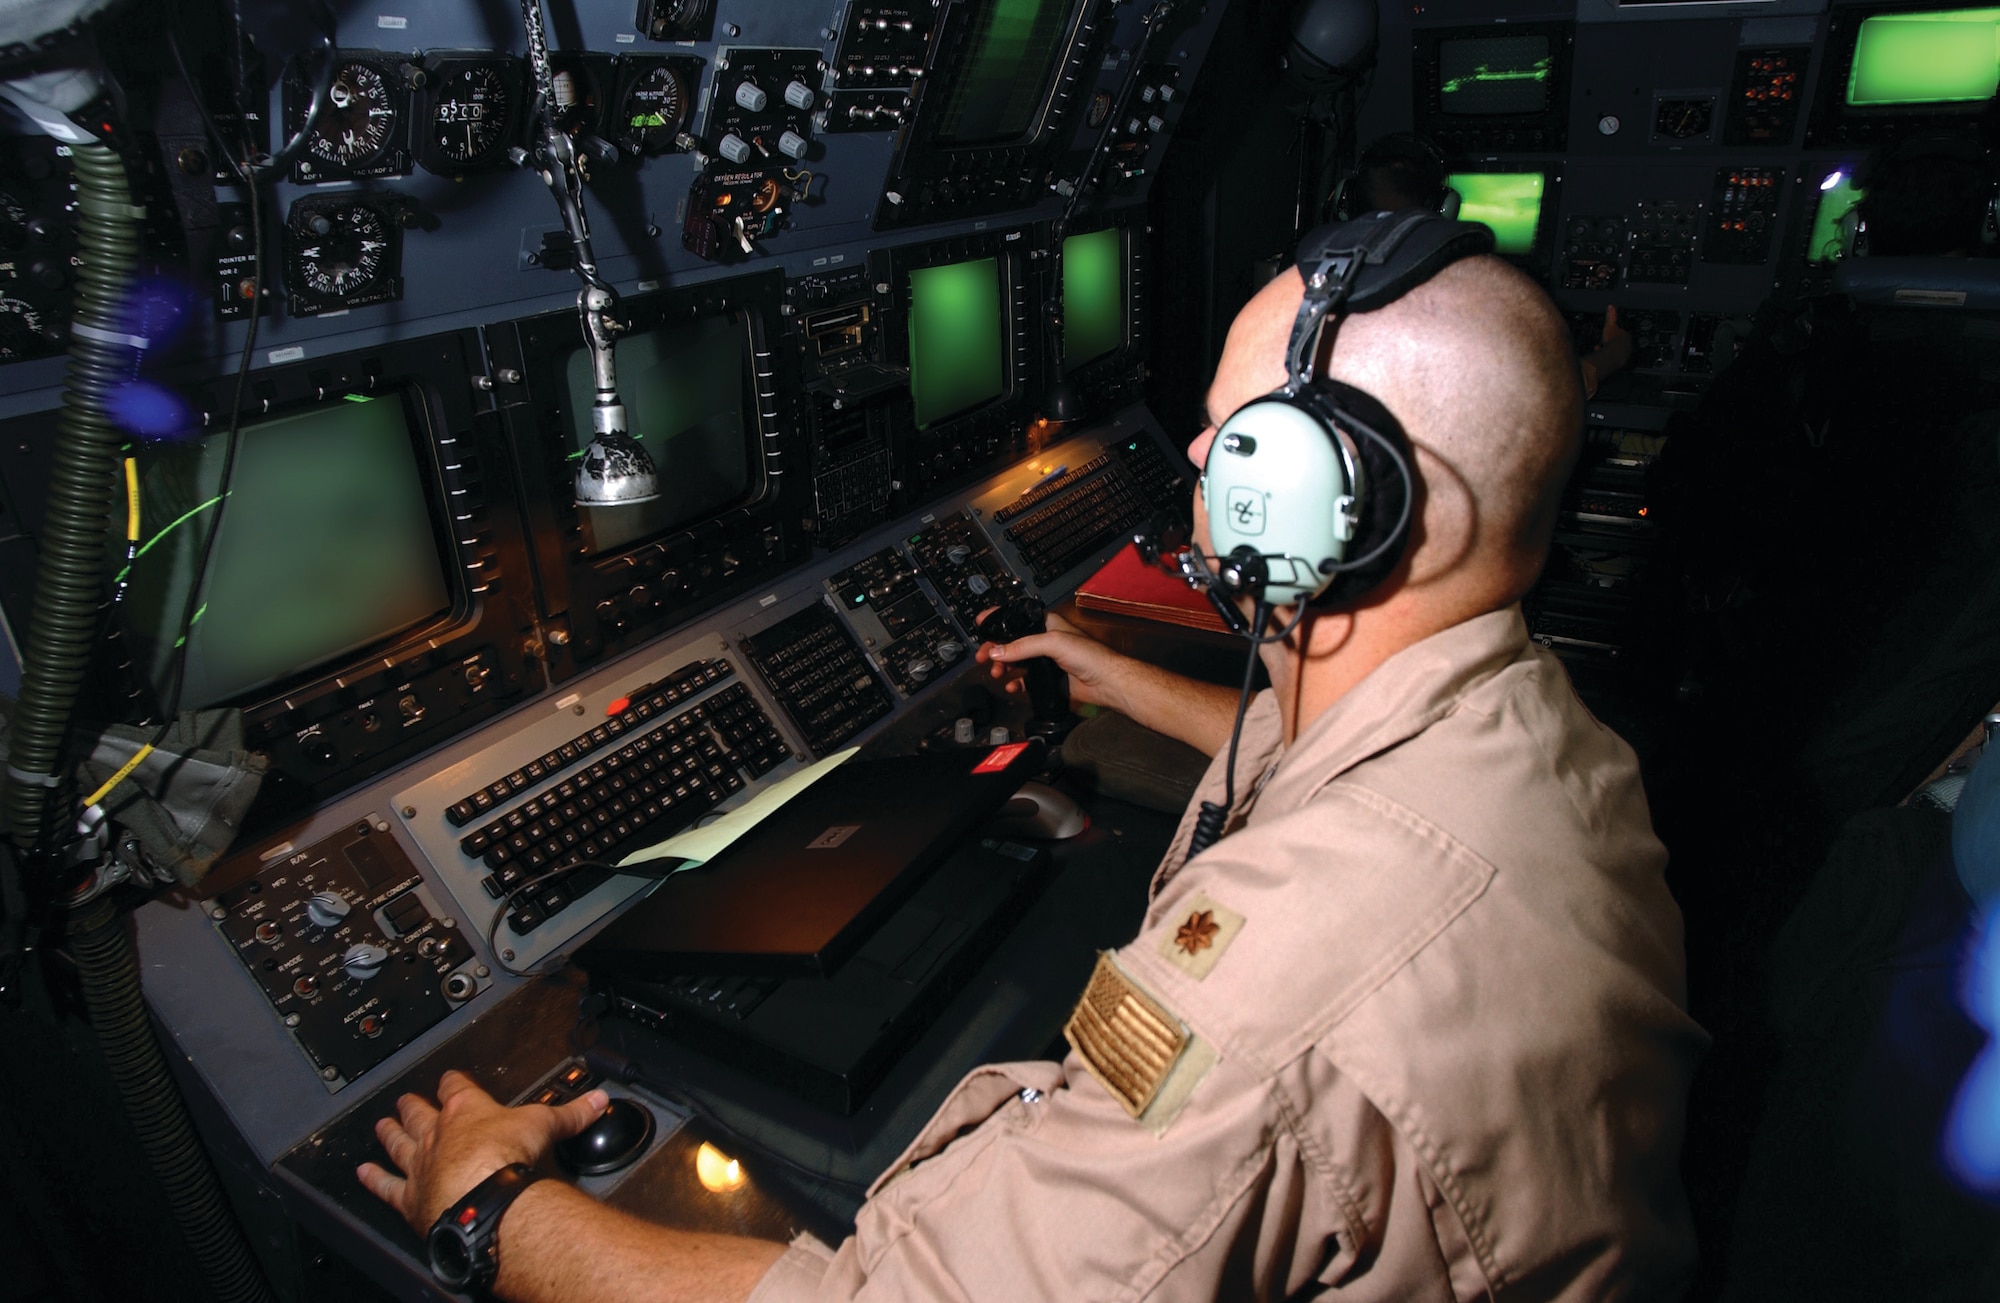 A navigator with the 4th Special Operations Squadron plots the course and provides guidance to the pilots of the AC-130U Spooky gunship during a mission in a deployed location. (Courtesy photograph)